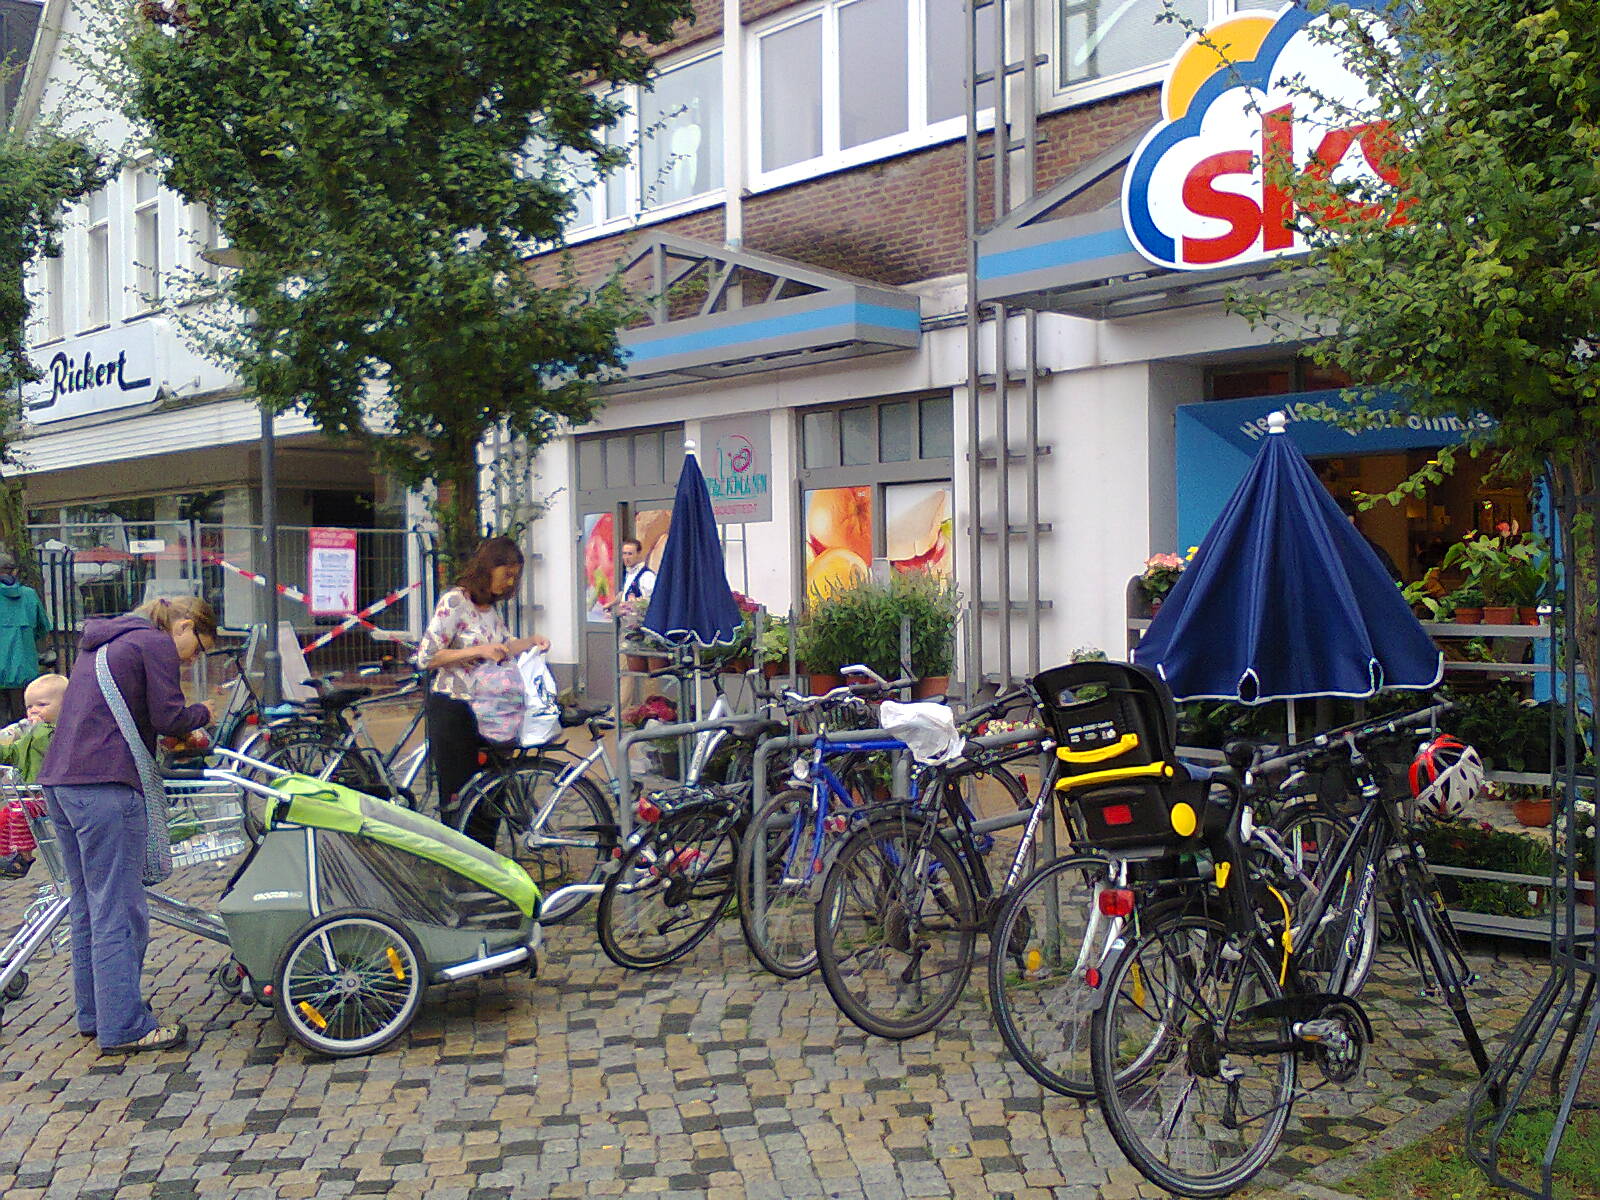 Cycle parking outside a small supermarket